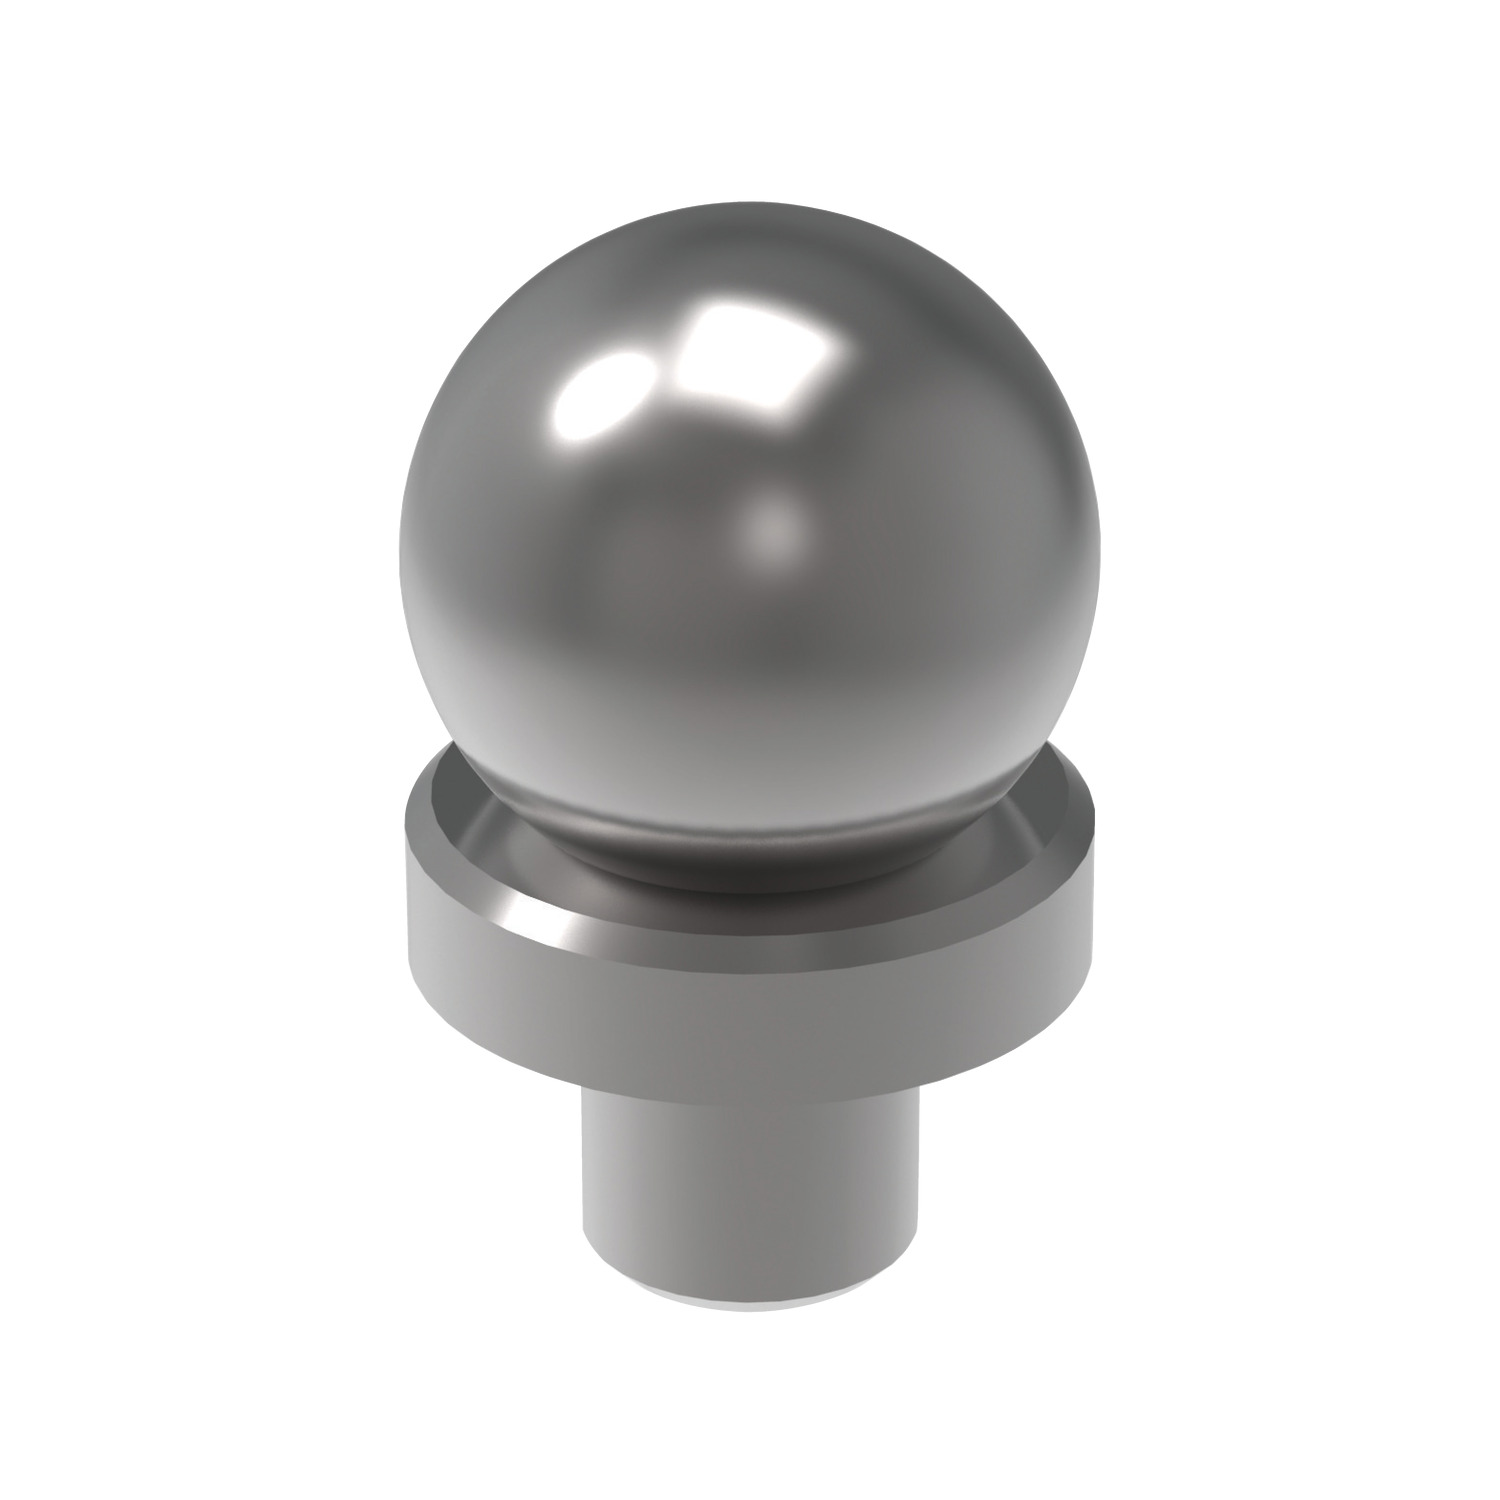 20500.W0025I Inspection Balls - Imperial - Steel. 0,2500 - 0,1247 - 0,58 - 0,2000